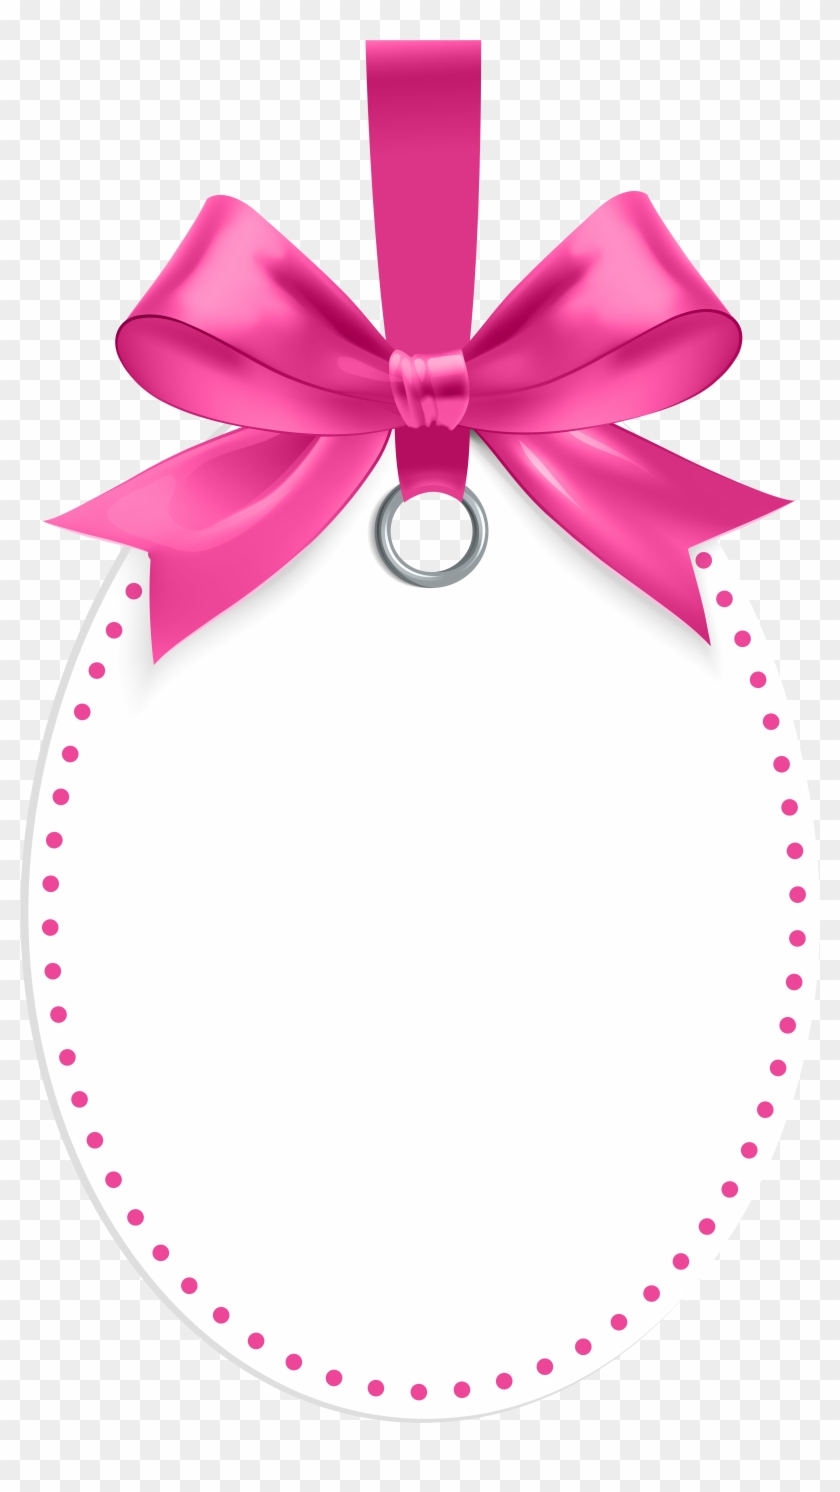 Free Png Download Label With Pink Bow Template Png - Label Bow Png Clipart #15051